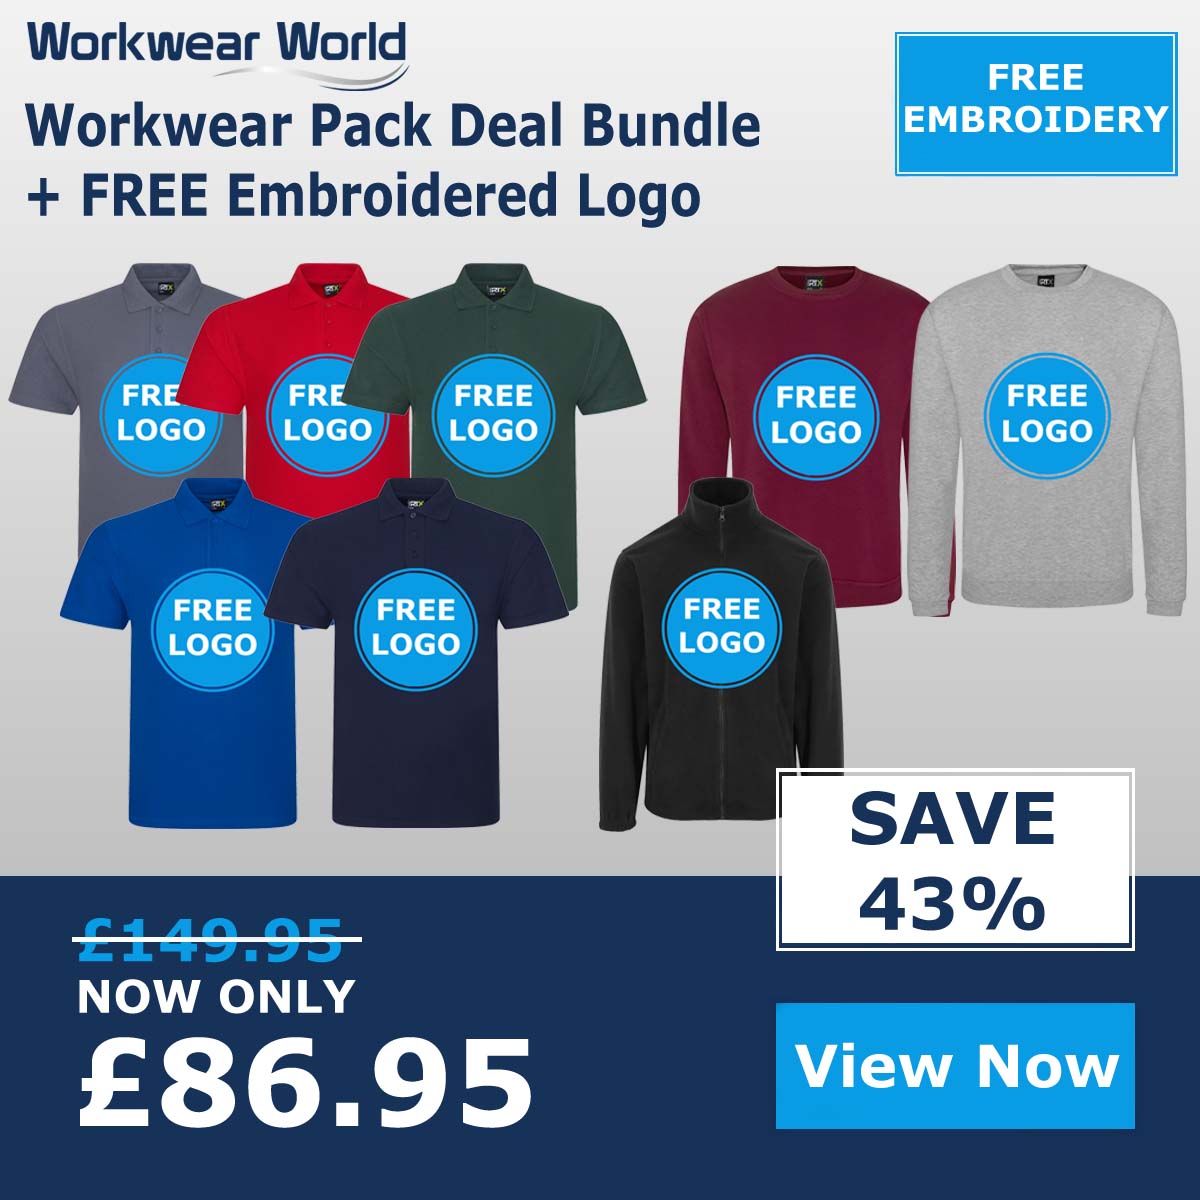 FREE LOGO Embroidered Uniform Workwear Bundle Polo Shirts Hoodies Package Clothing Gender-Neutral Adult Clothing Hoodies & Sweatshirts Sweatshirts 